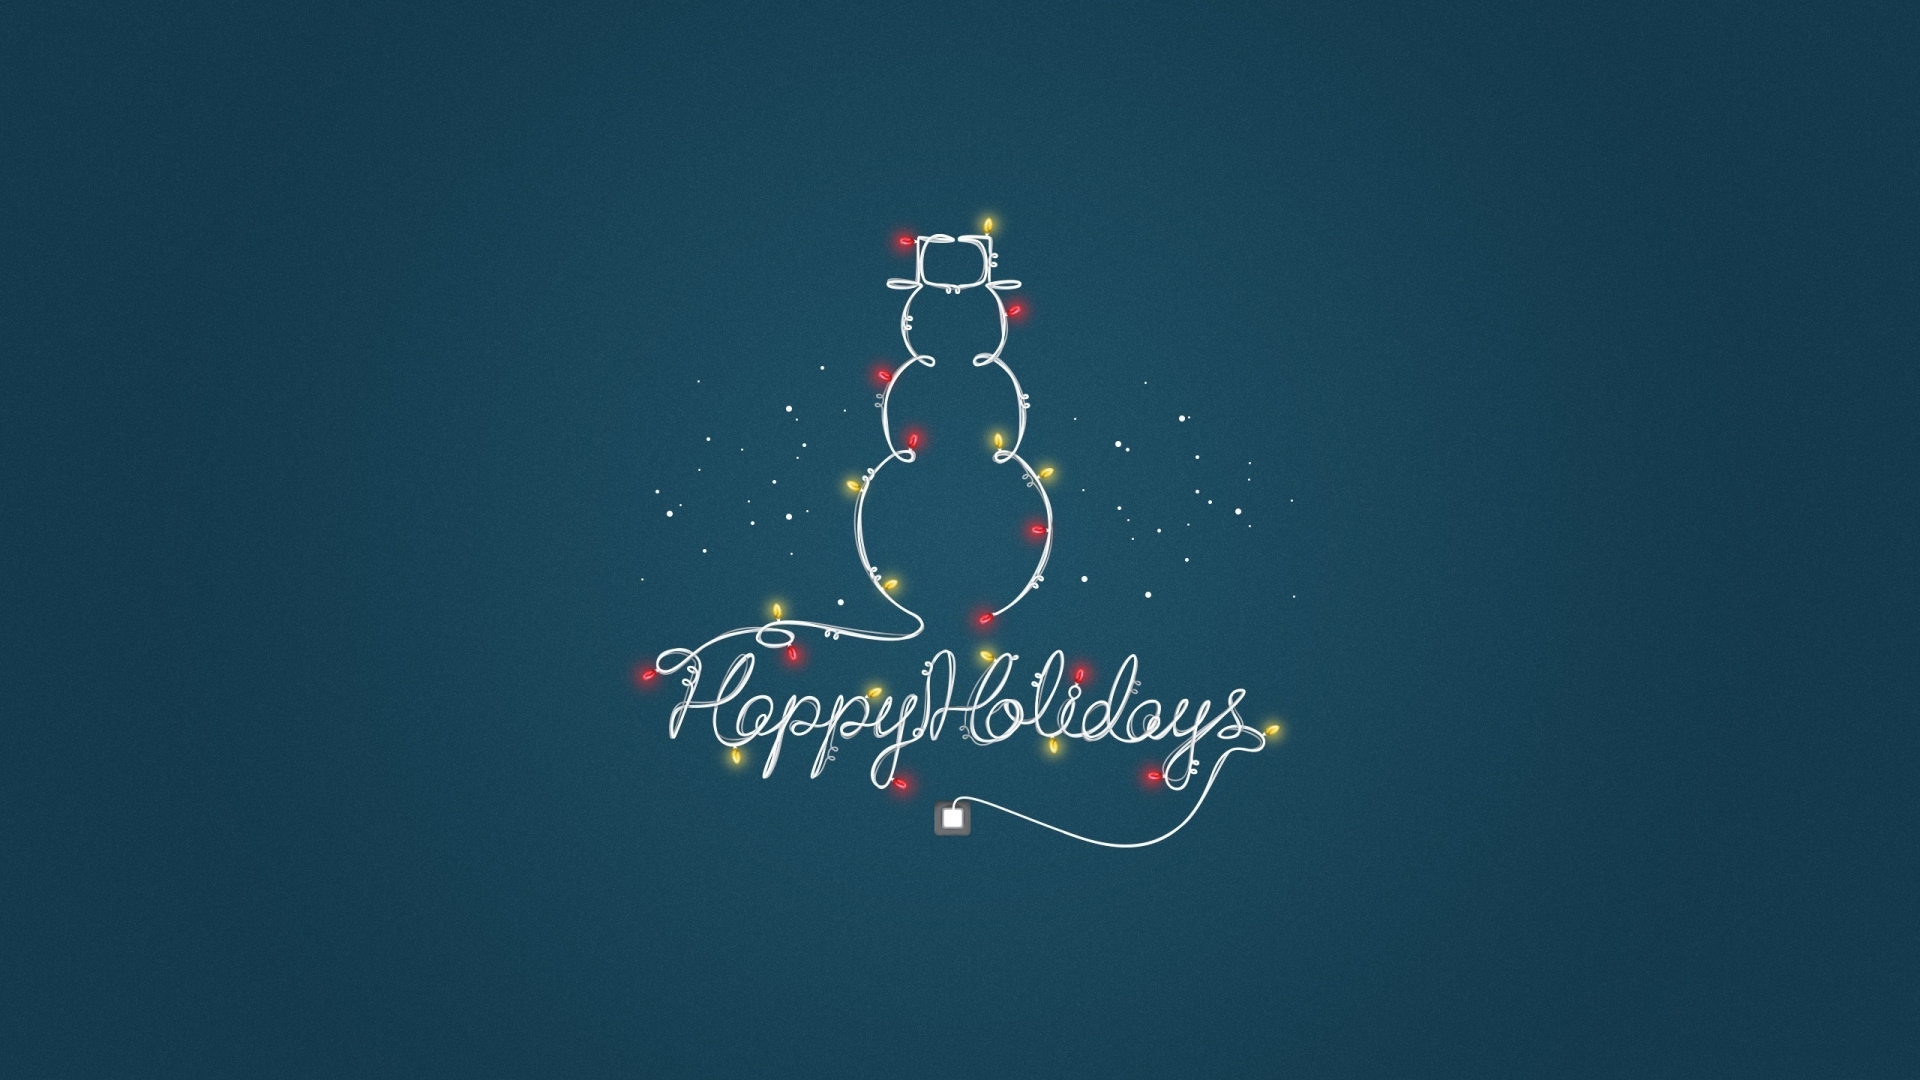 Wish You Happy Holidays for 1920 x 1080 HDTV 1080p resolution